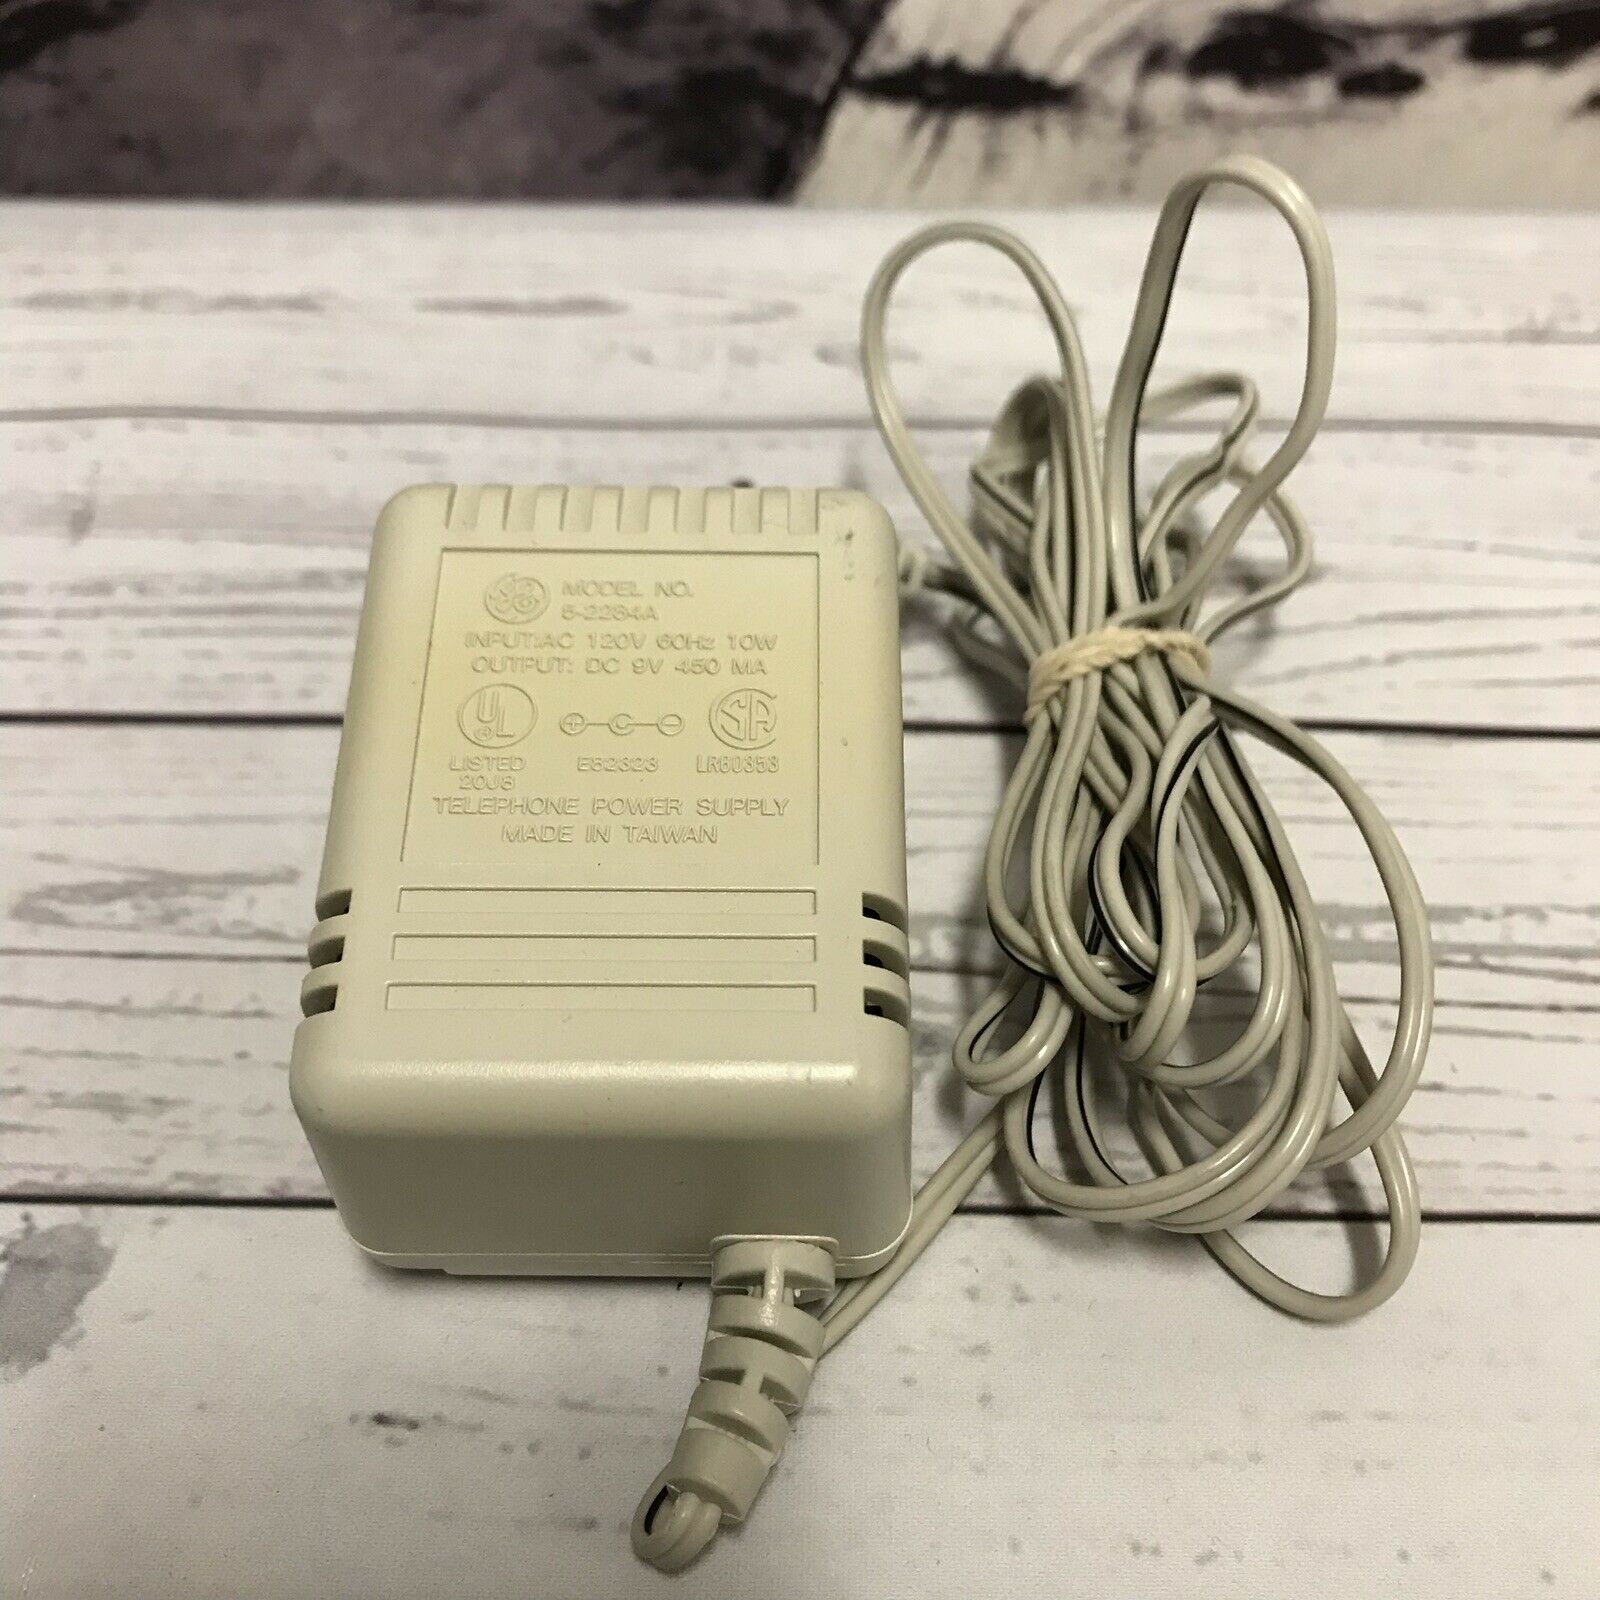 General Electric 5-2284A AC Adapter Power Supply Charger DC 9V 450mA Output Model: 5-2284A Output Voltage: 9VDC MPN - Click Image to Close